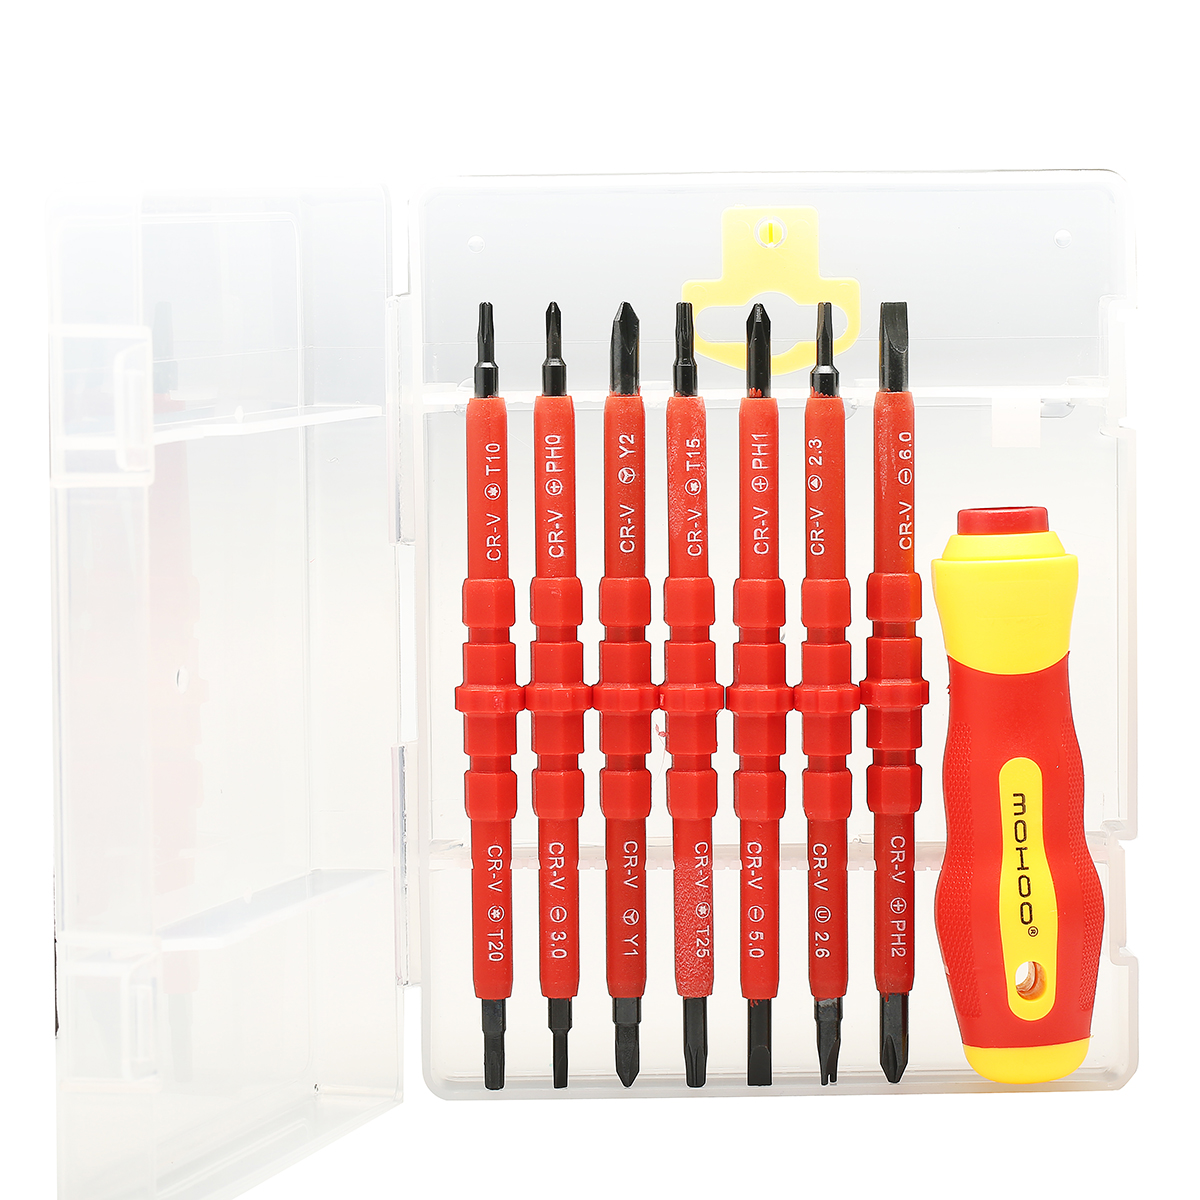 

MOHOO 7pcs Electronic Insulated Hand Screwdriver Tools Accessory Set